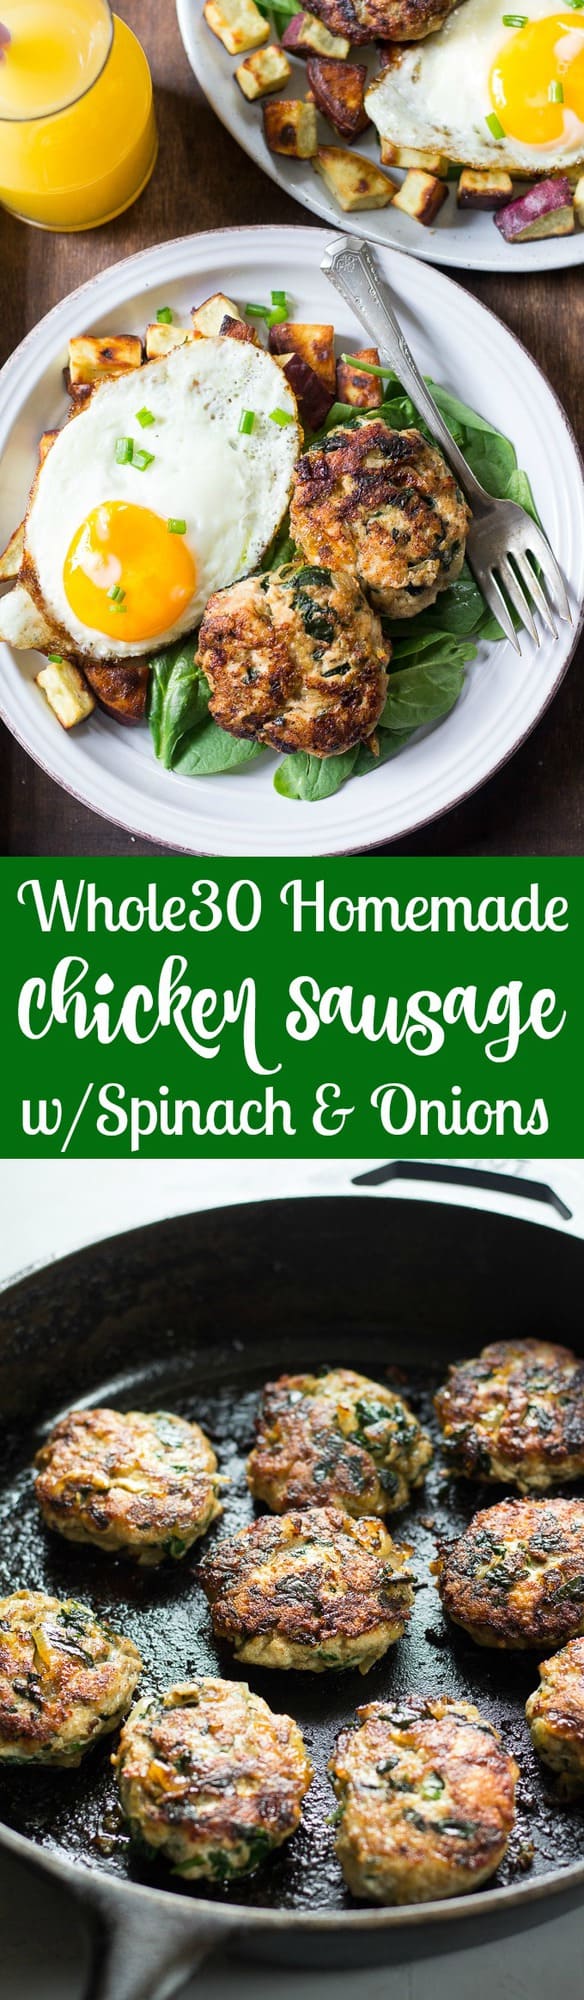 Easy Homemade Chicken Sausage Patties with Spinach and Caramelized Onions that you can make ahead of time and serve with any meal! They're made with real, whole ingredients and are sugar free, Paleo and Whole30 compliant.